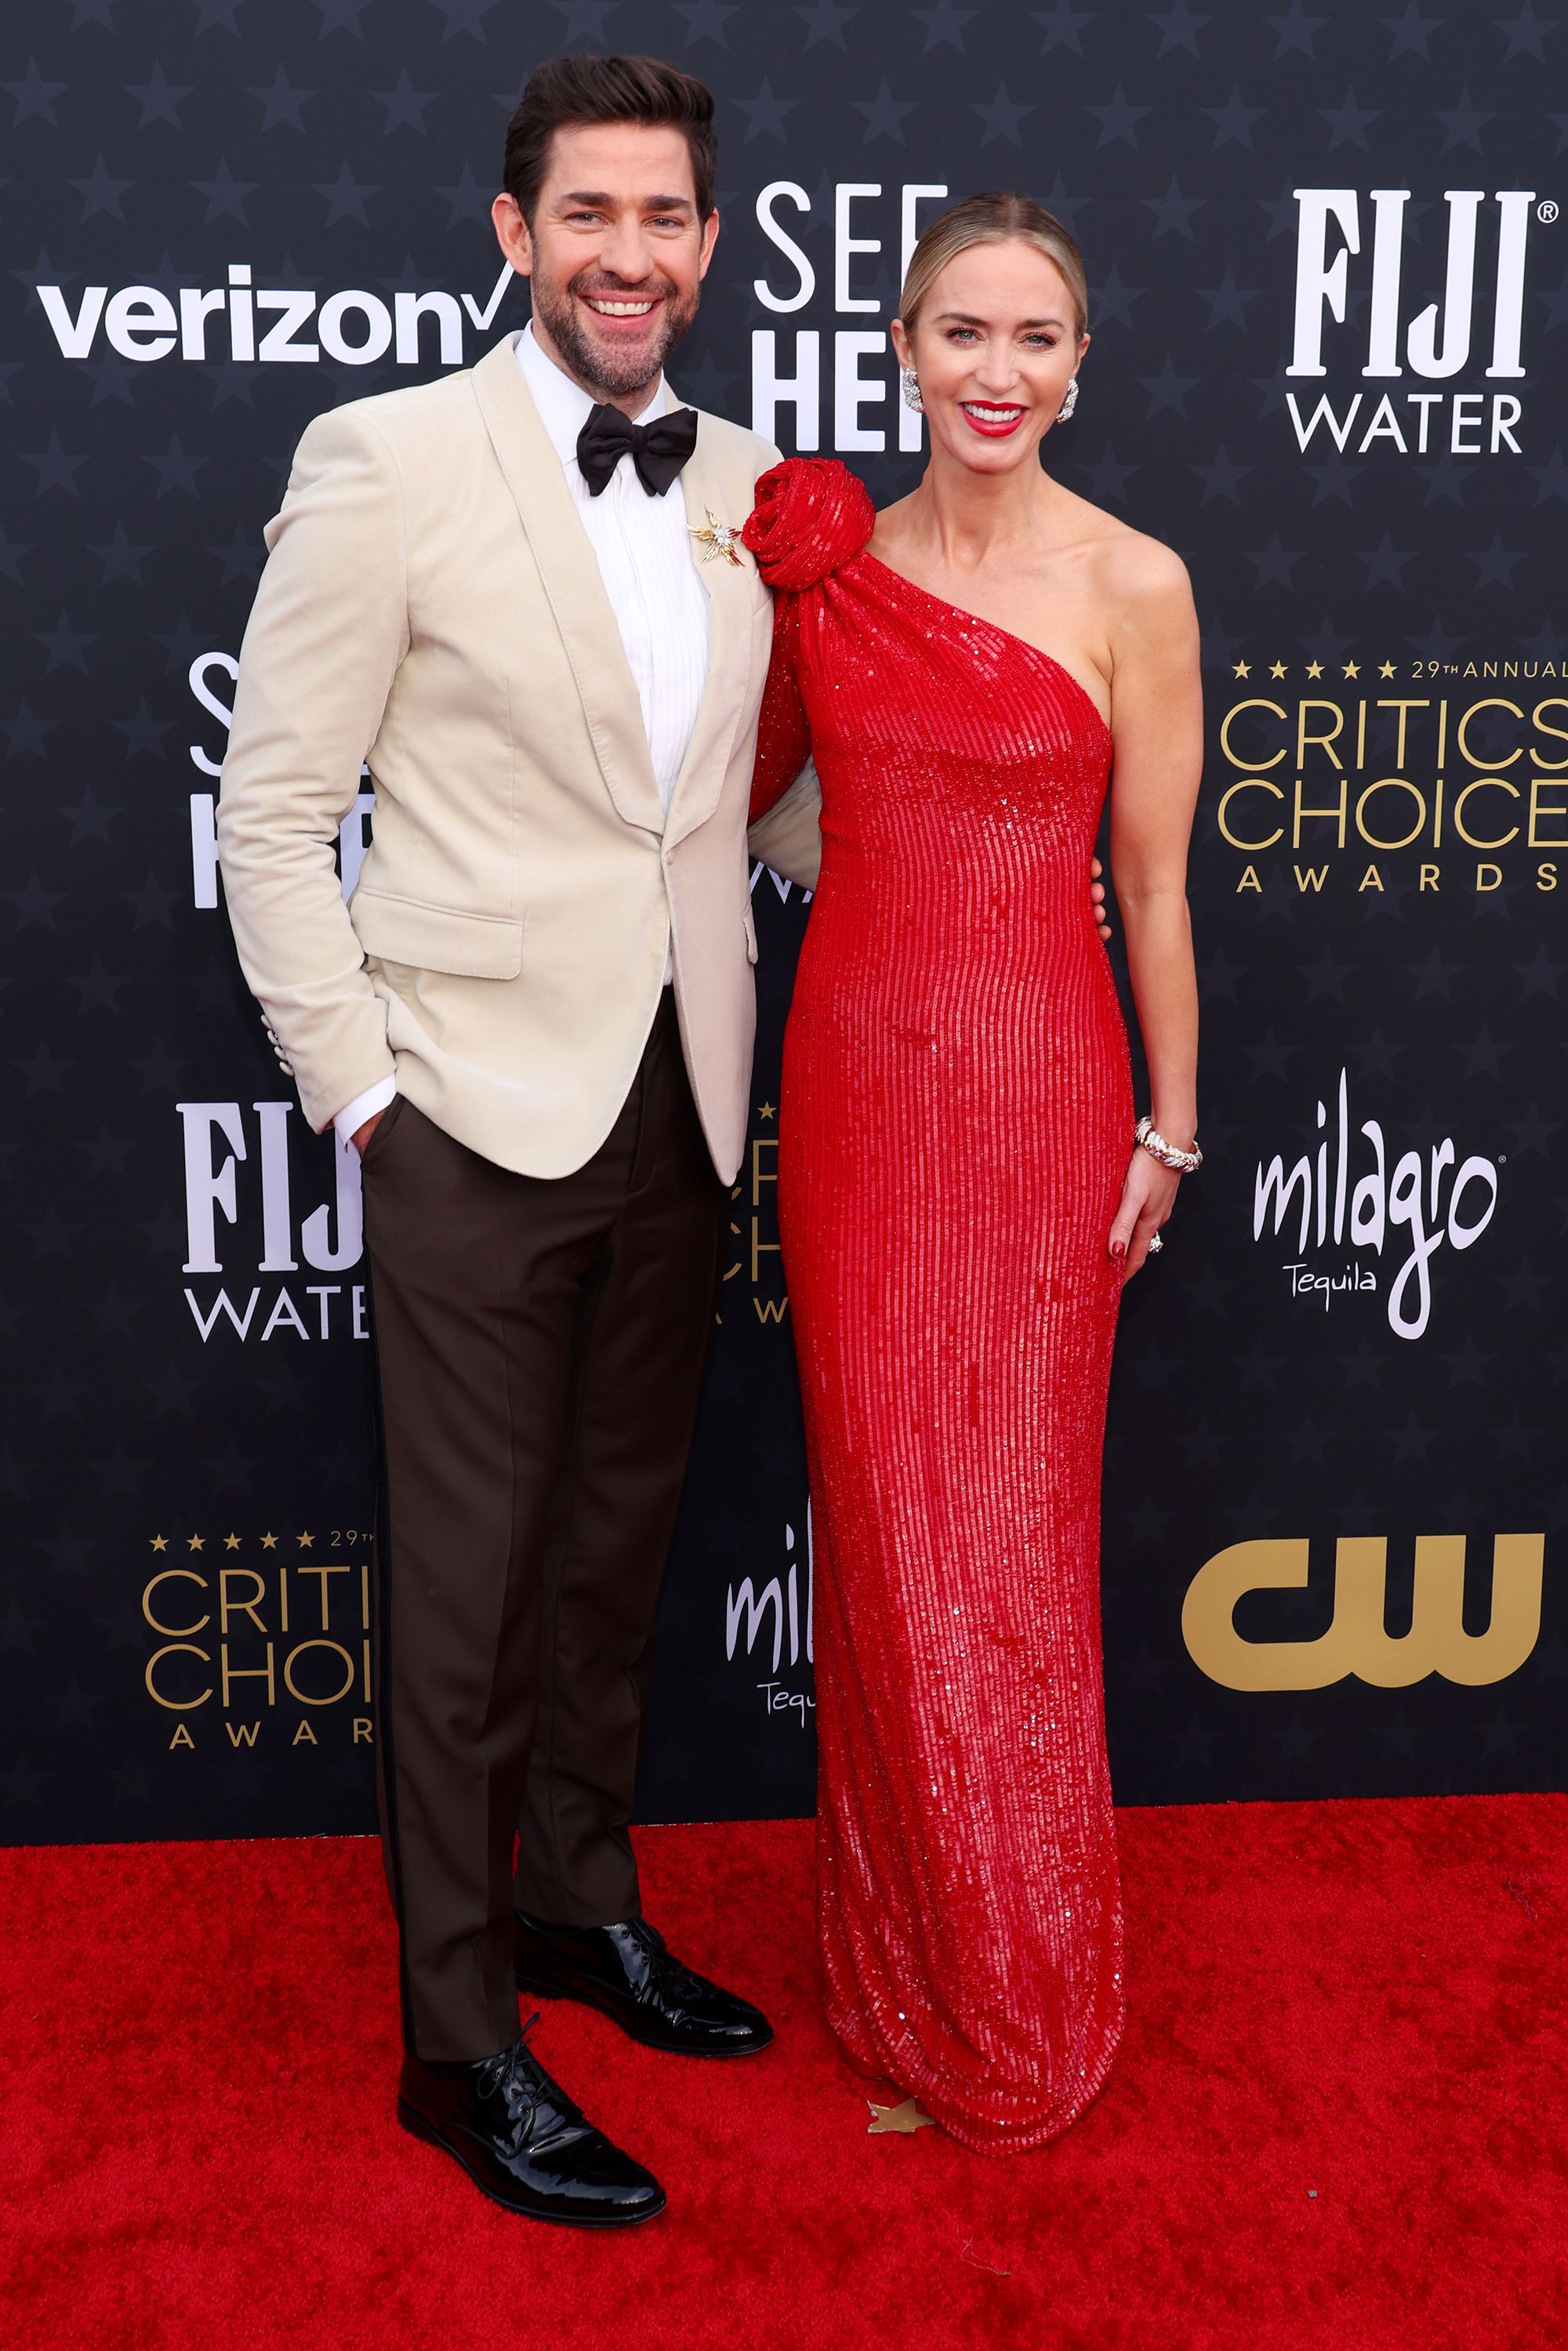 John Krasinski wore an off-white Dolce & Gabbana tuxedo jacket with black pants and bowtie, while Emily Blunt was in a sleek red Giorgio Armani Privé dress with a rosette detail and Tiffany & Co. jewelry.